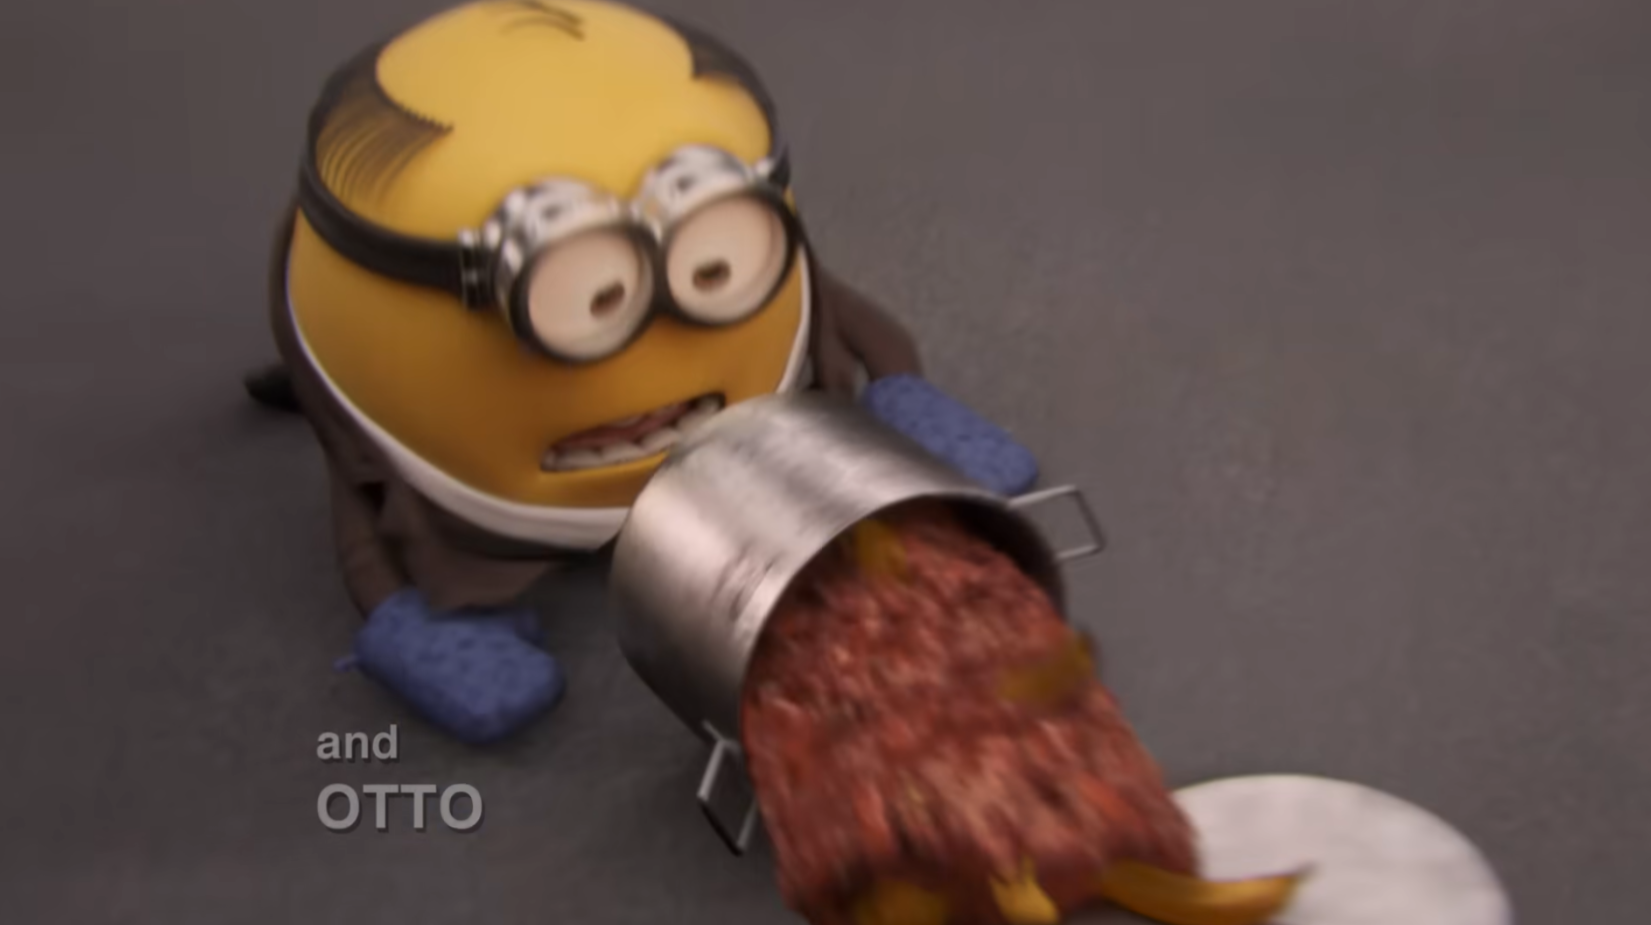 Brand synergy eats its own tail as The Office recreates its intro with Minions